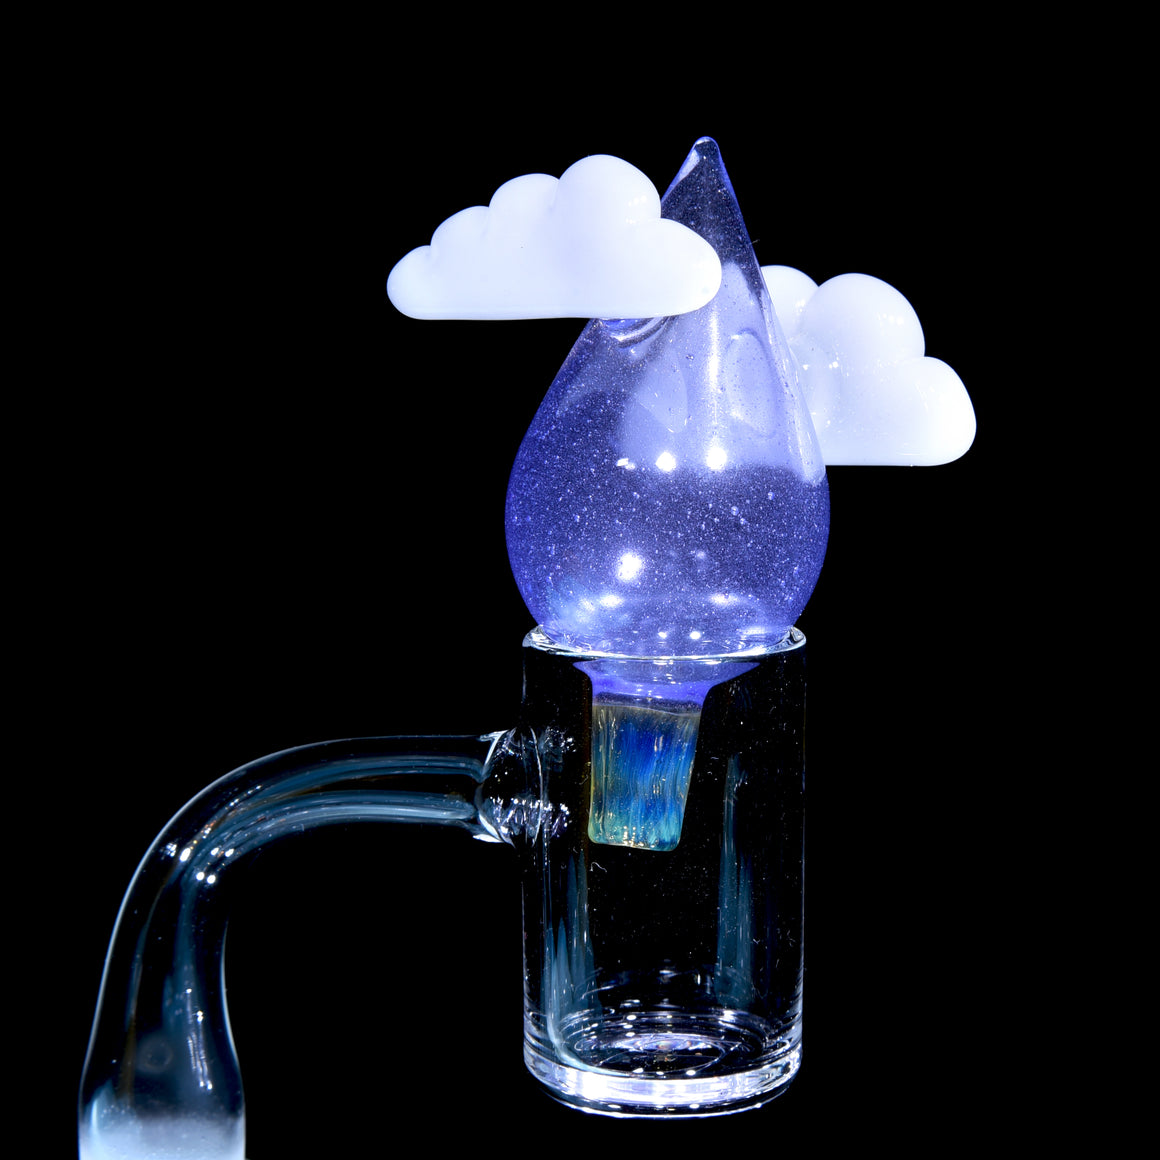 Raindrop and Clouds Bubble Cap